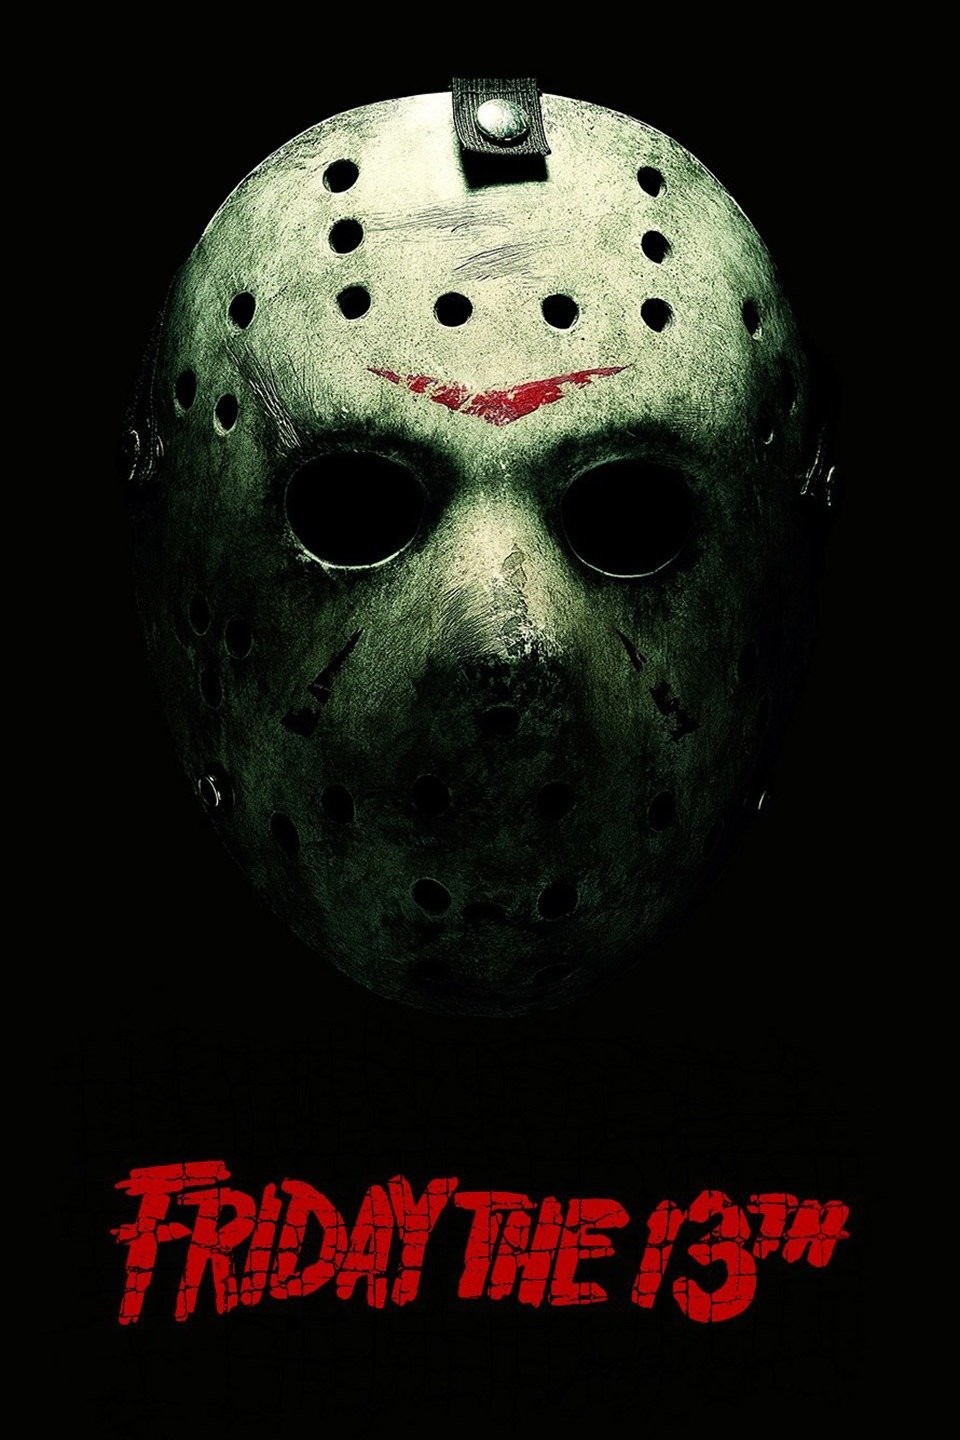 Friday the 13th' (1980) Vs. 'Friday the 13th' (2009) - Bloody